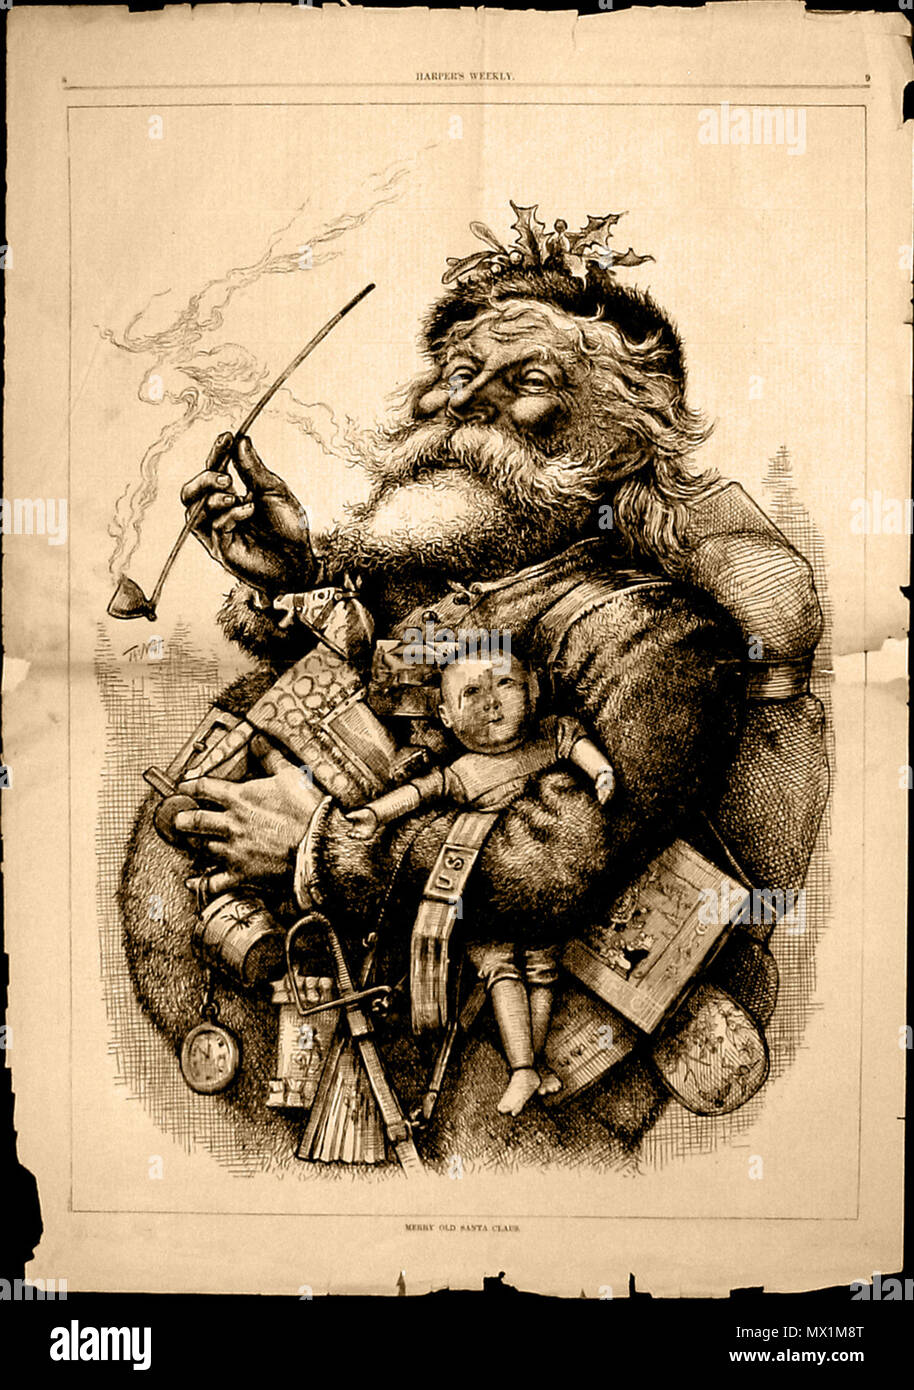 . English: Thomas Nast's most famous drawing, 'Merry Old Santa Claus', from the January 1, 1881 edition of Harper's Weekly. Thomas Nast immortalized Santa Claus' current look with an initial illustration in an 1863 issue of Harper's Weekly, as part of a large illustration titled 'A Christmas Furlough' in which Nast set aside his regular news and political coverage to do a Santa Claus drawing. The popularity of that image prompted him to create another illustration in 1881. 1 January 1881. Thomas Nast 10 1881 0101 tnast santa 200 Stock Photo